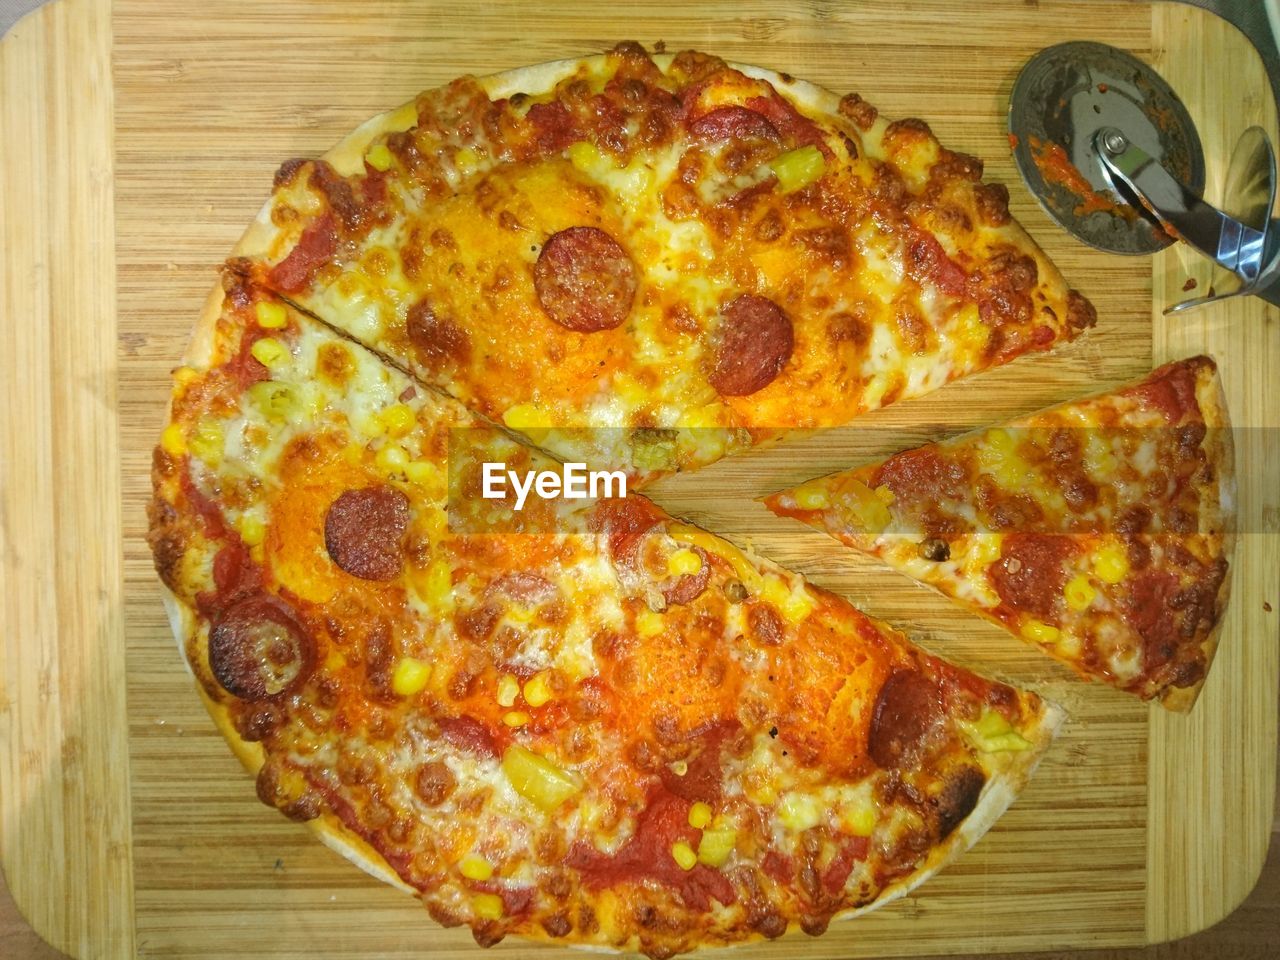 CLOSE-UP OF PIZZA ON PLATE